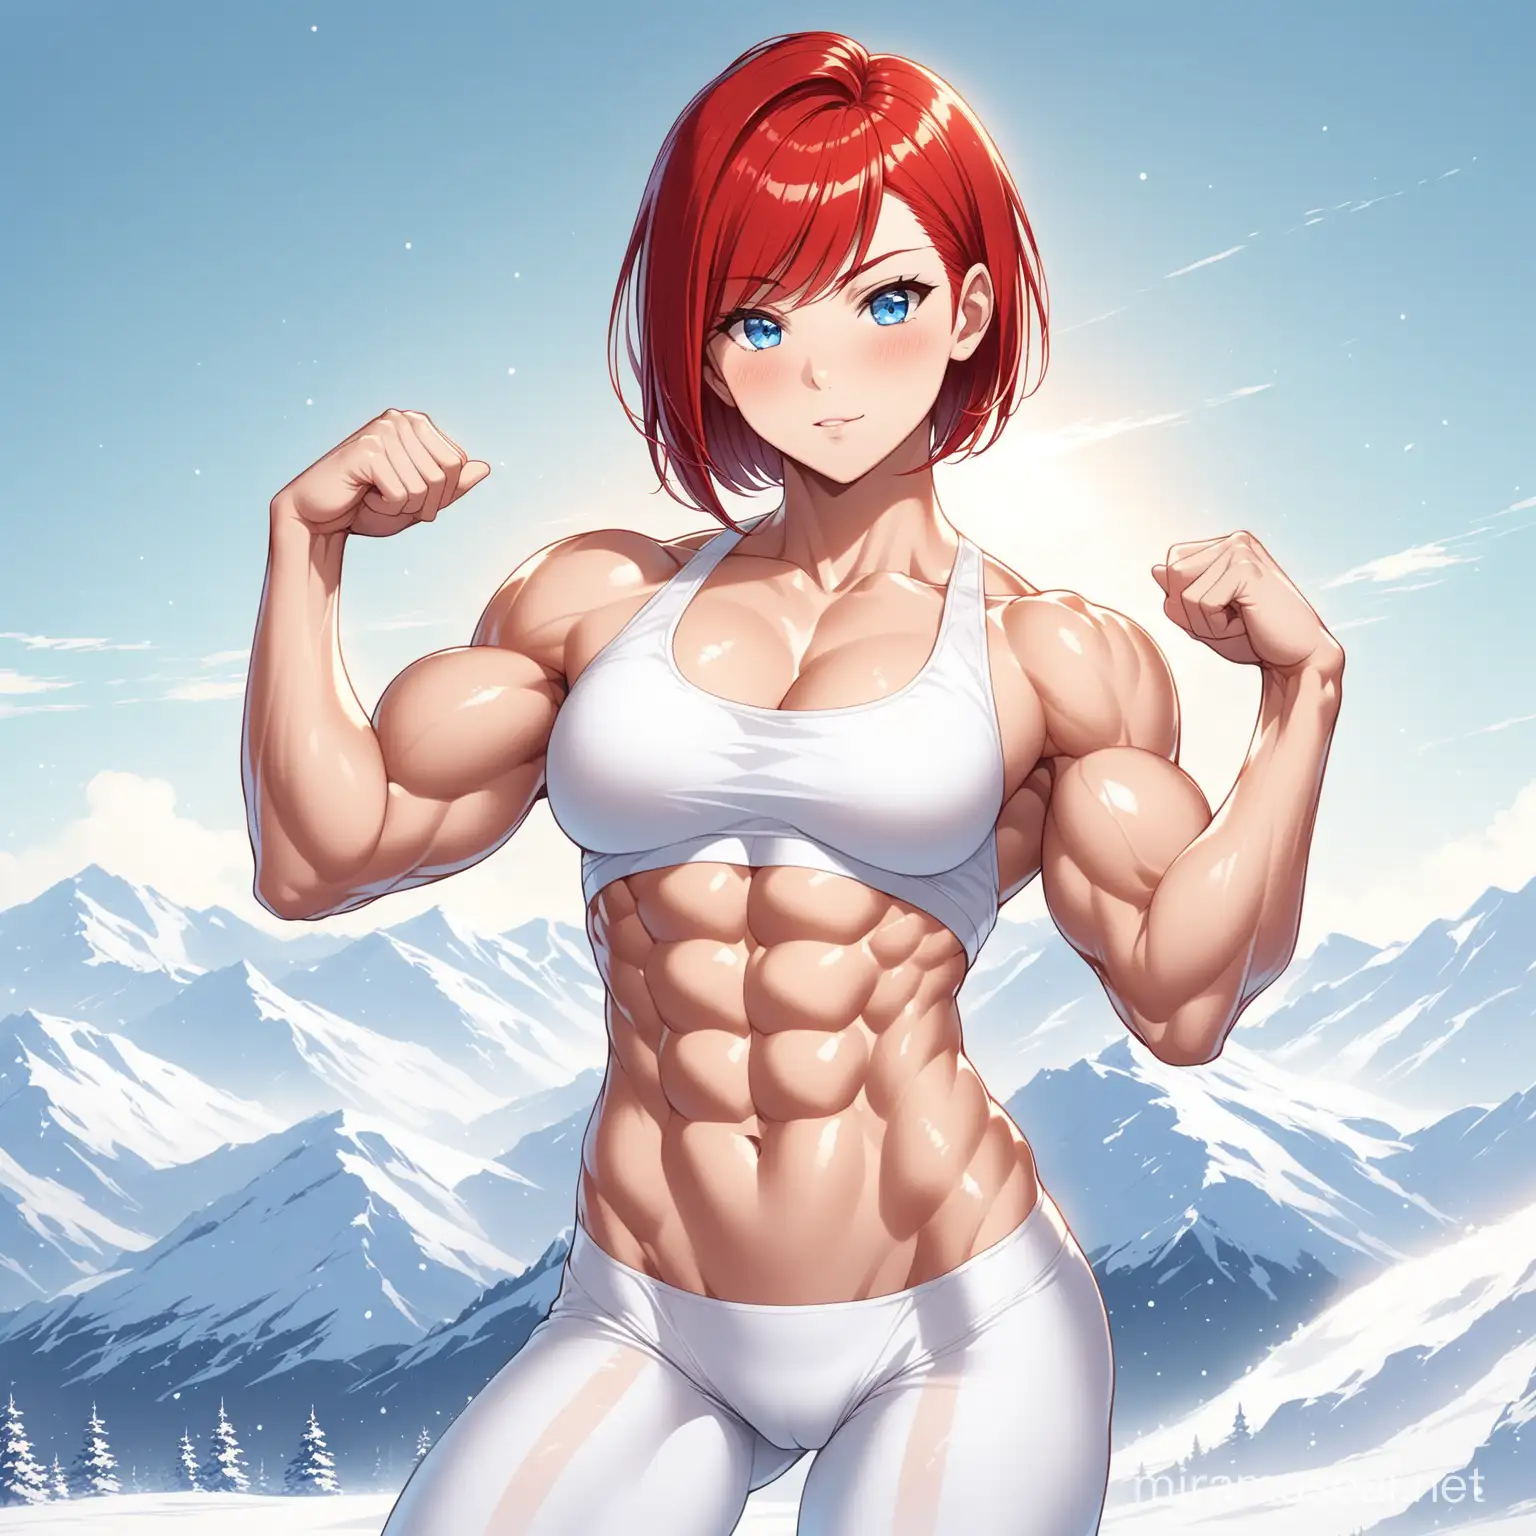 muscle,fit female, bright blue eyes, red bob haircut, dd cup, 8 pack abs, lean female body, lean body, female, woman, whole body, whitte stockings, white scenery